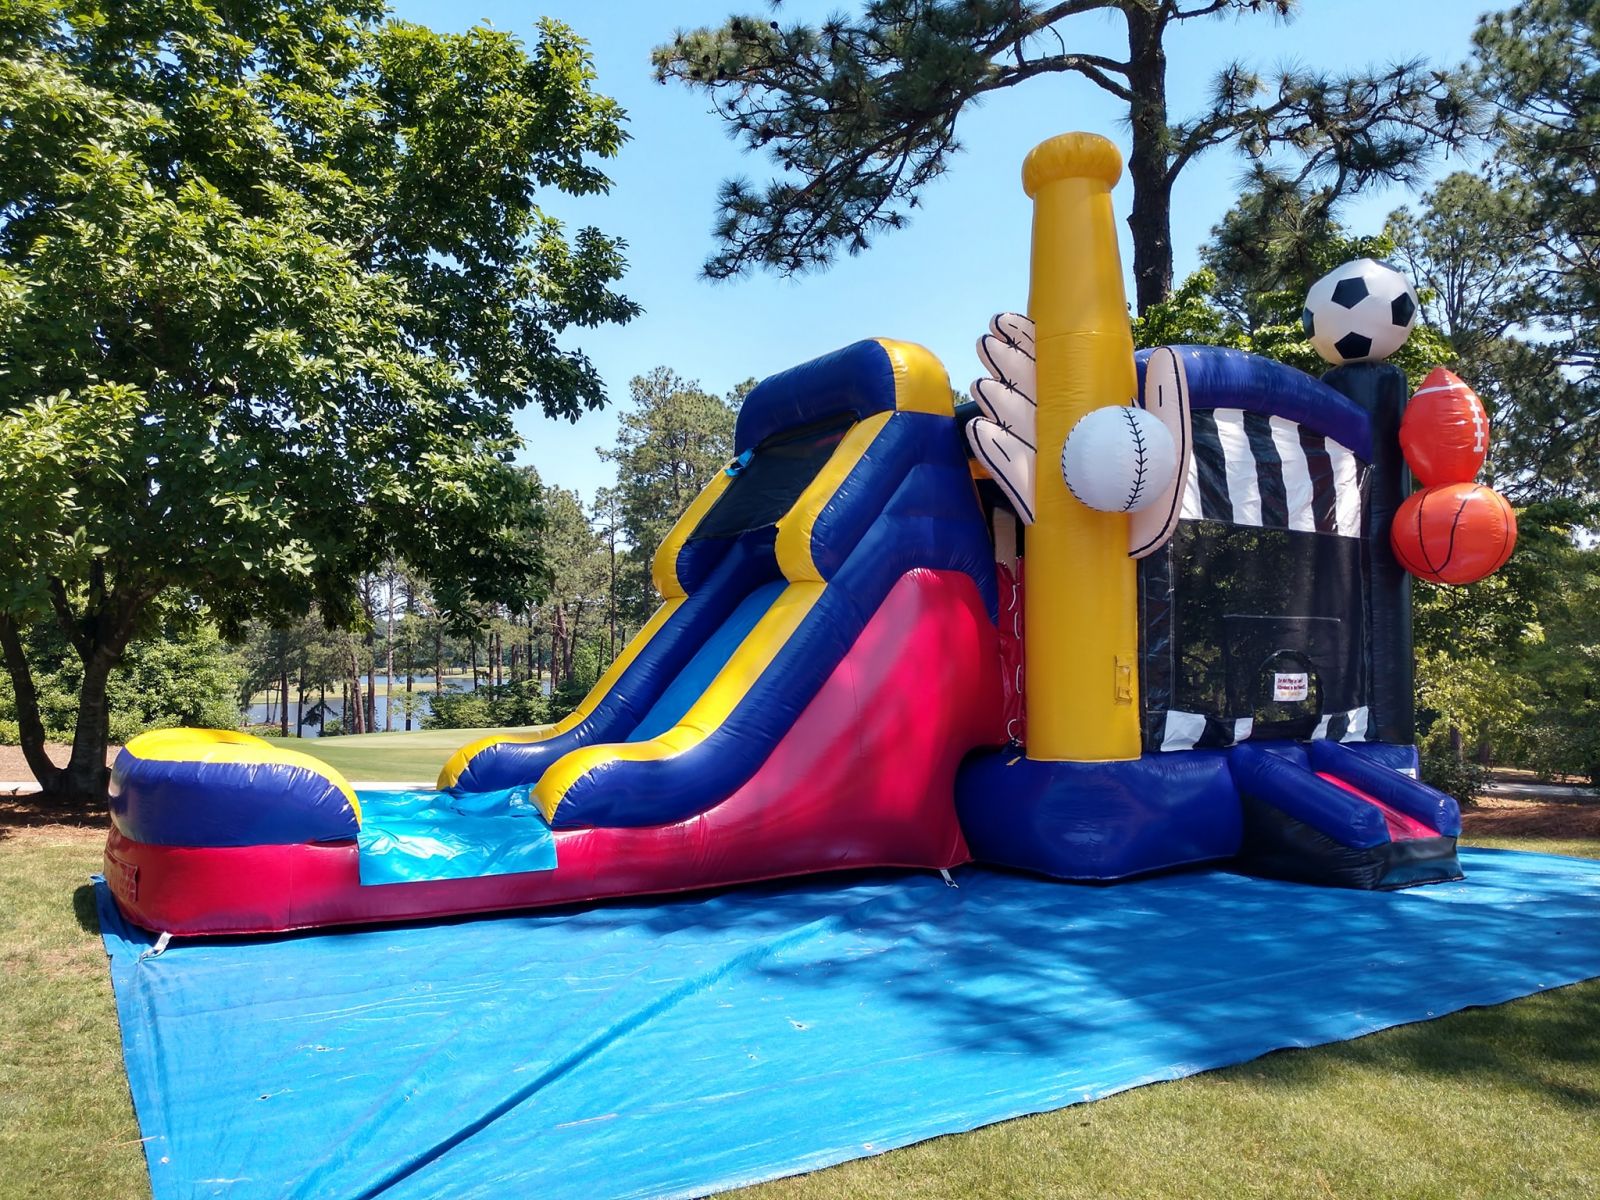 Sports themed combo bounce house with water slide rental from Carolina Fun Factory